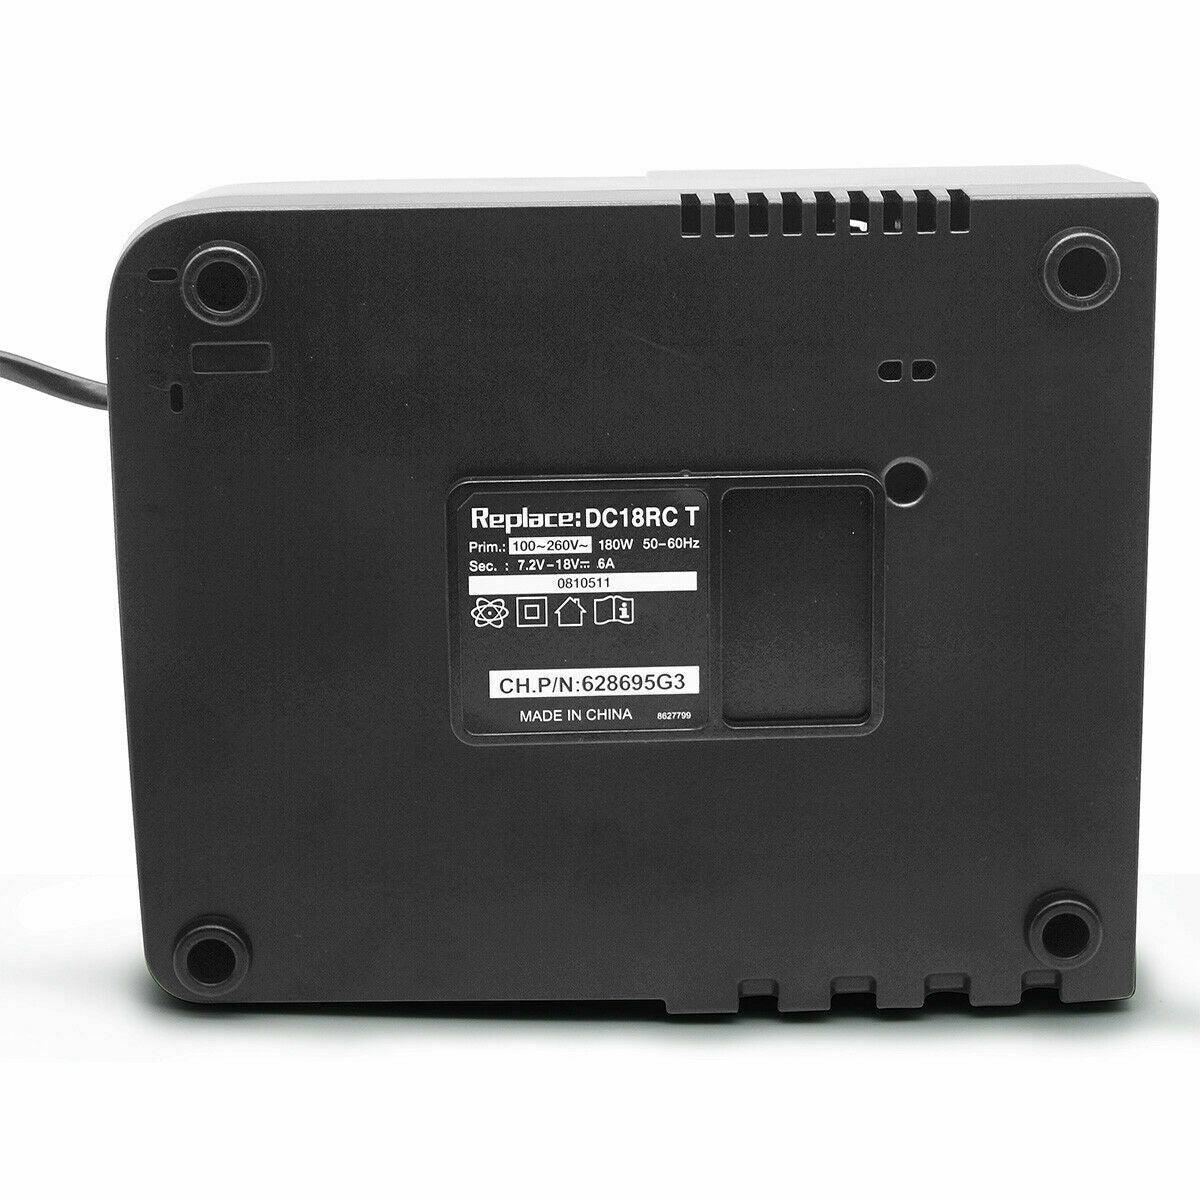 For Makita BL1830 BL1840 BL1850 DC18RC Rapid Fast Lithium-Ion Battery Charger AU - Office Catch